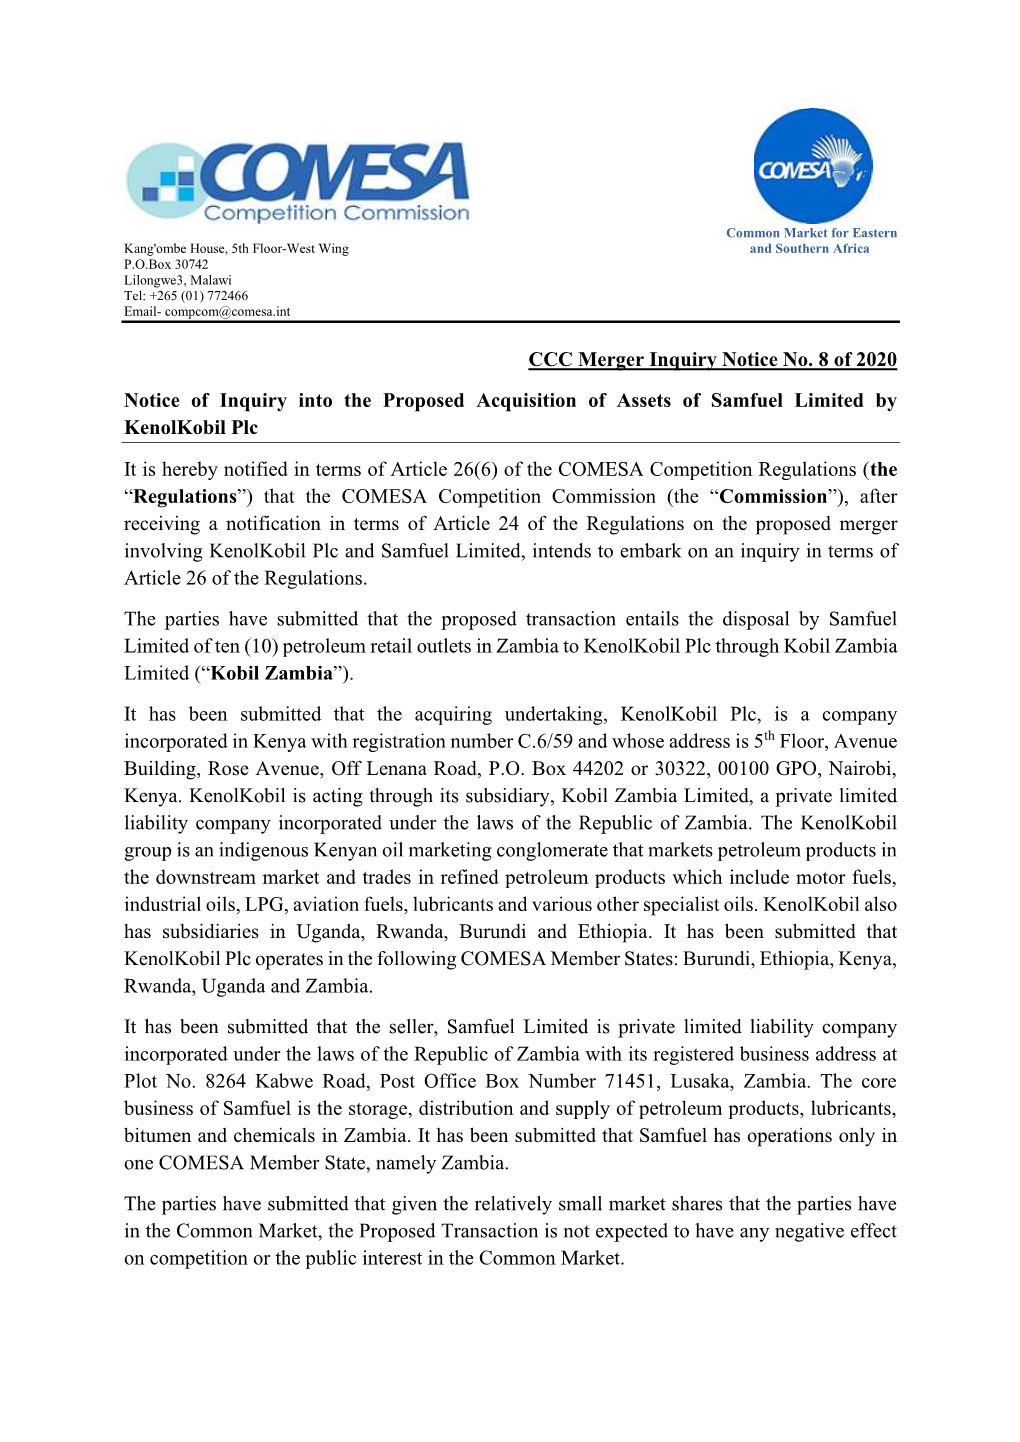 CCC Merger Inquiry Notice No. 8 of 2020 Notice of Inquiry Into the Proposed Acquisition of Assets of Samfuel Limited by Kenolkobil Plc